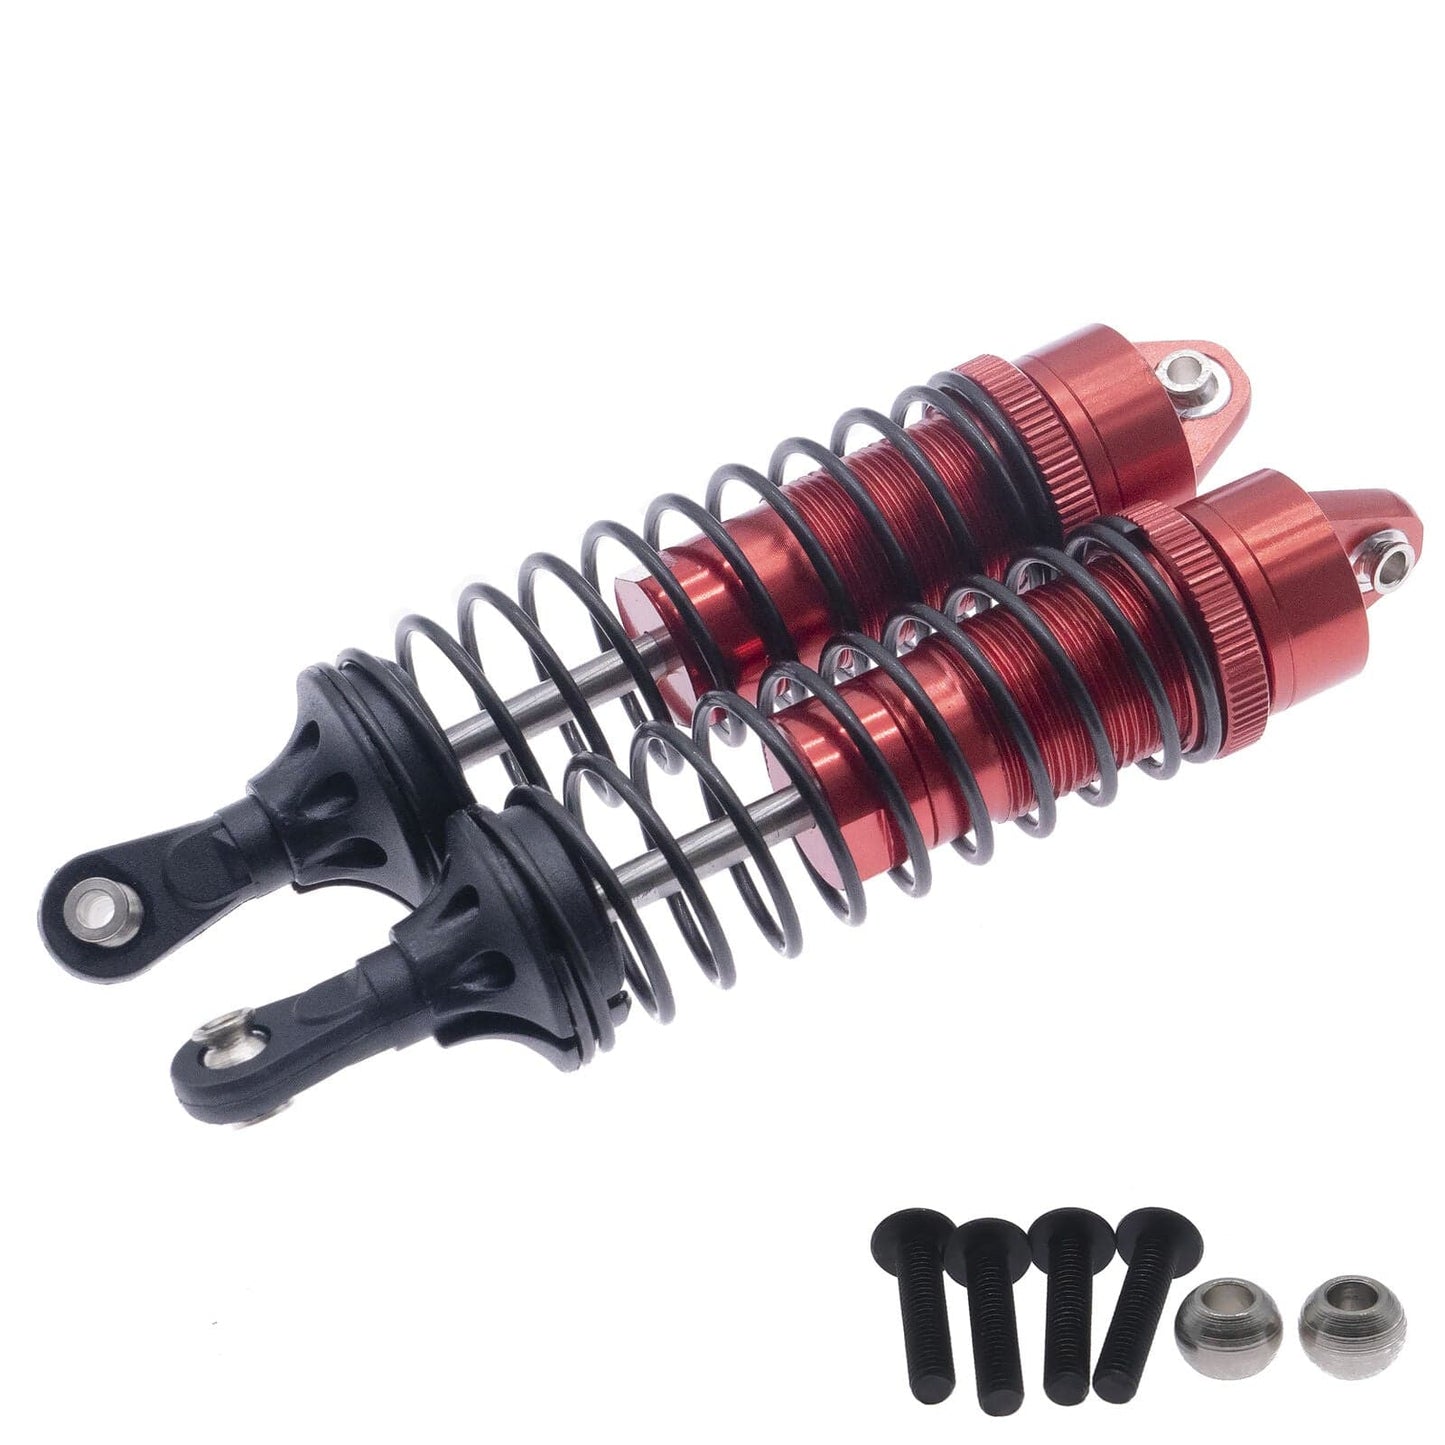 RCAWD ECX UPGRADE PARTS rear shocks RCAWD Aluminum CNC DIY Upgrade Hop-up parts For 1-10 ECX 2WD Series Ruckus AMP red